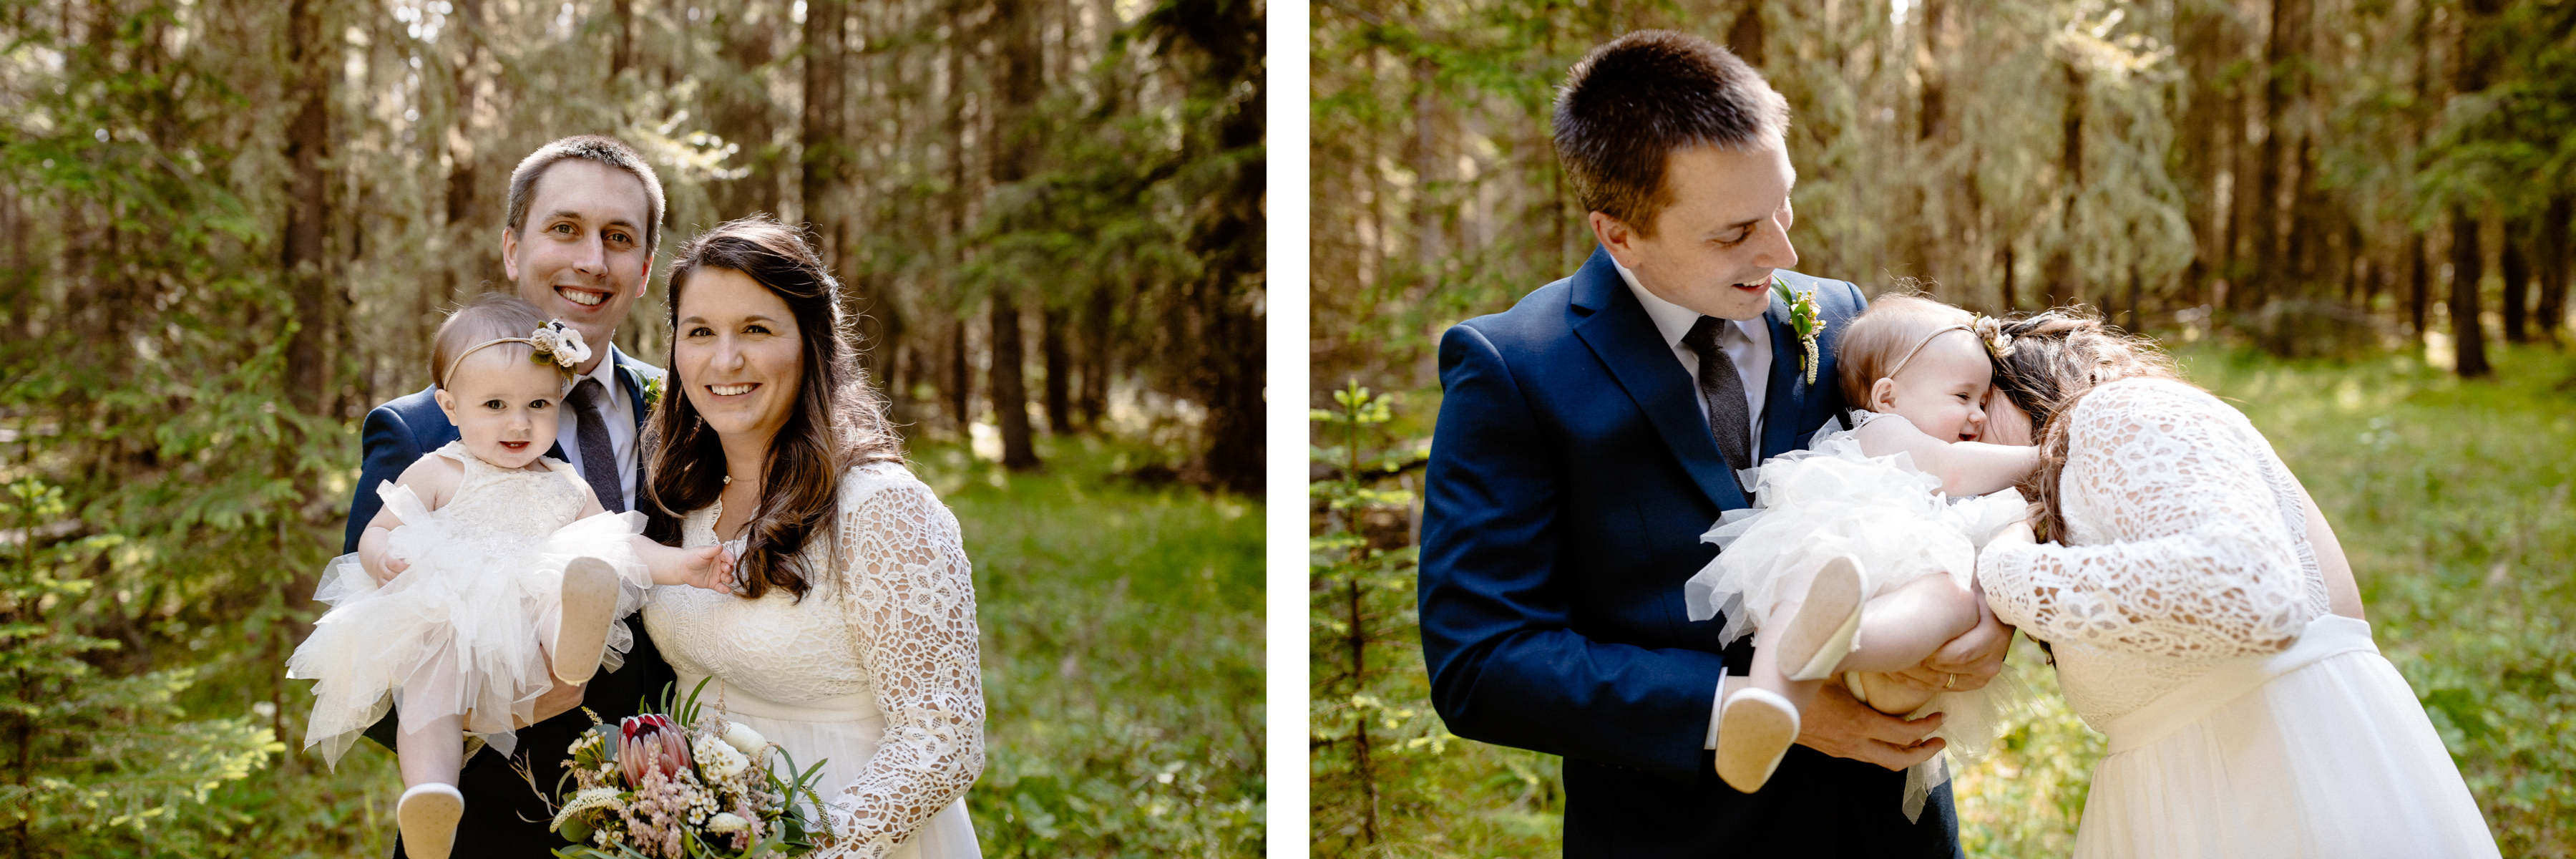 Vow Renewal Photography in Banff - Image 13